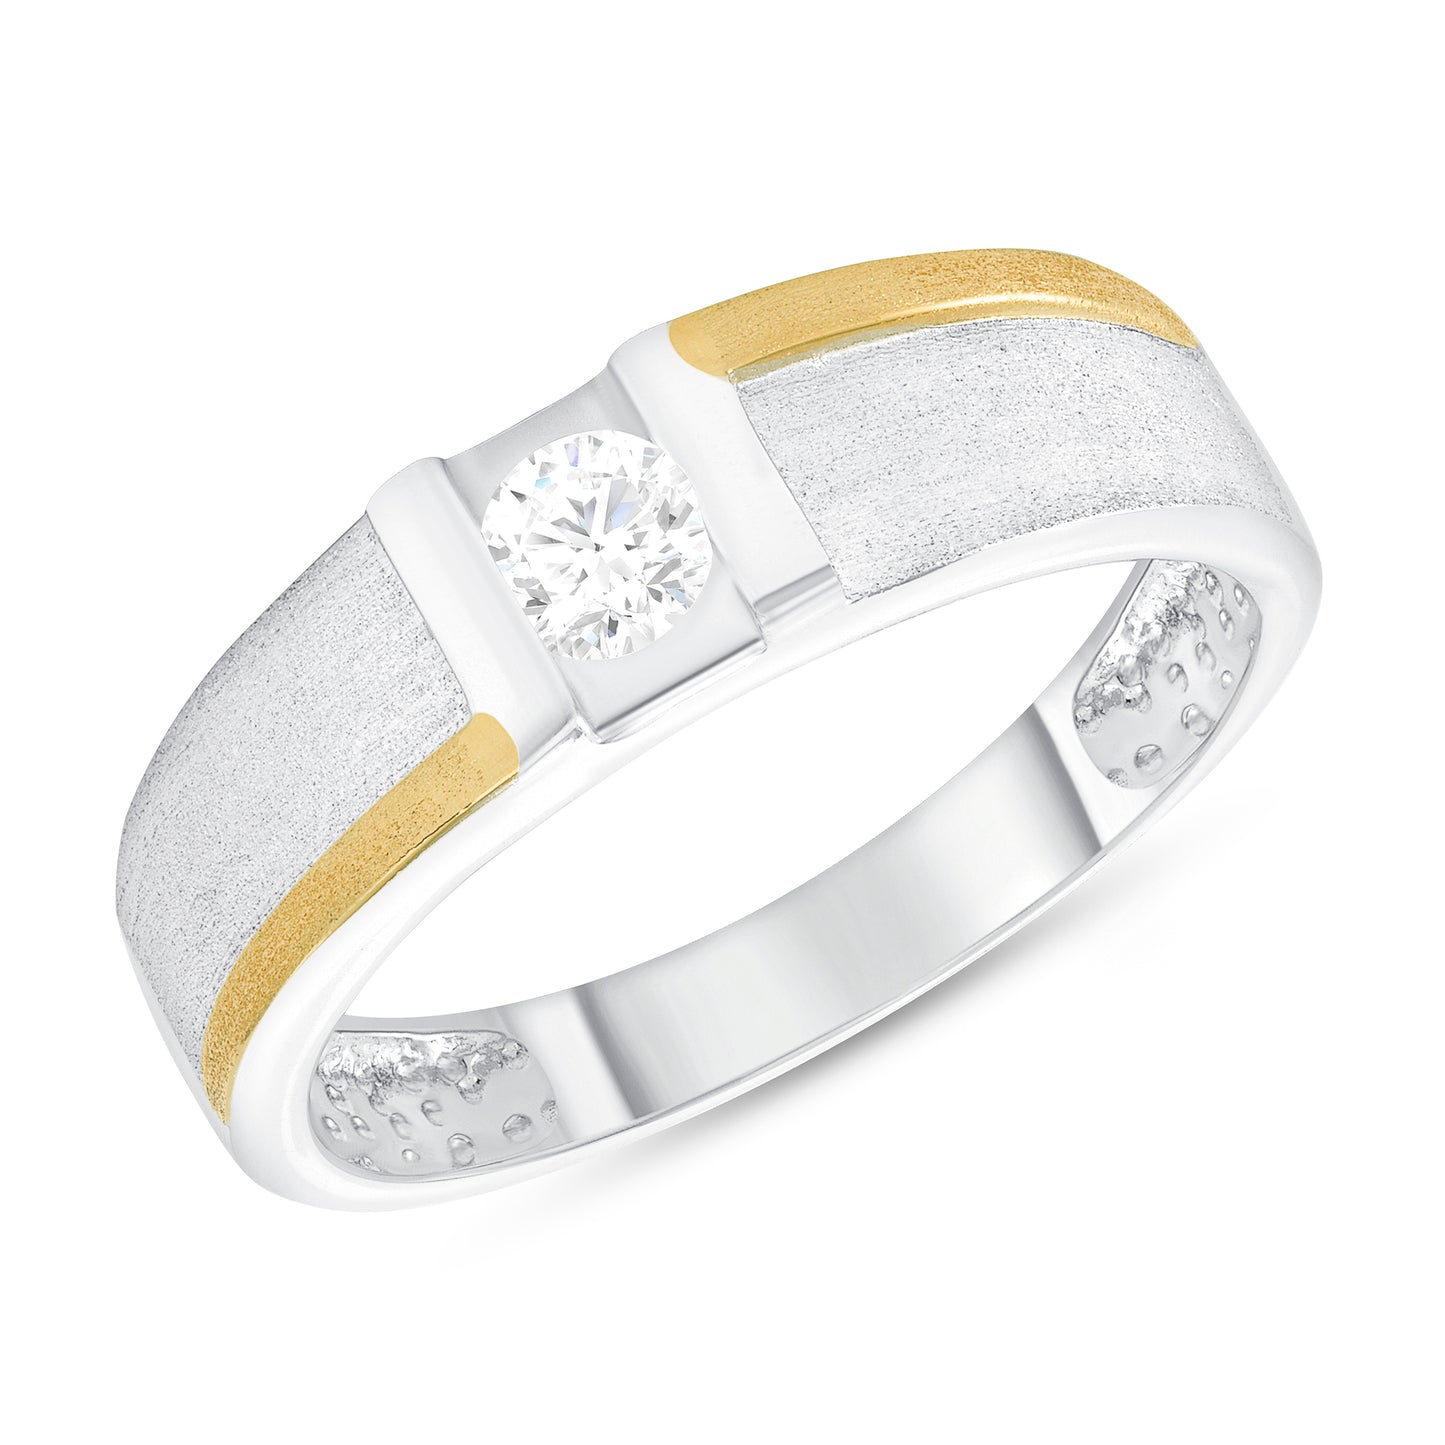 Silver 925 2 Tone Band with Single Cubic Zirconia Men's Ring. DGR2072